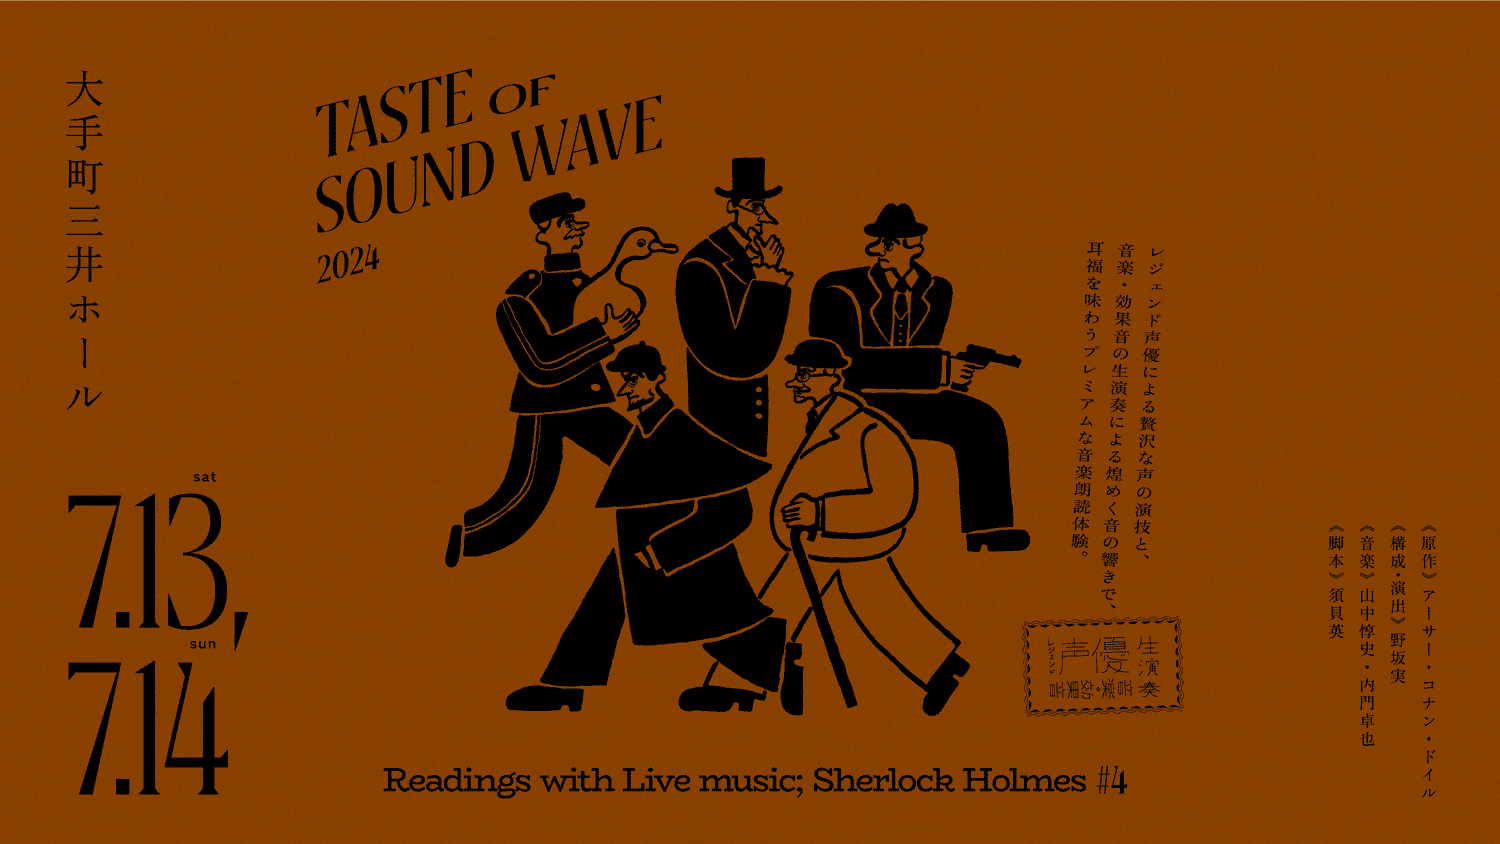 TASTE OF SOUND WAVE ”Readings with Live music; Sherlock Holmes #4